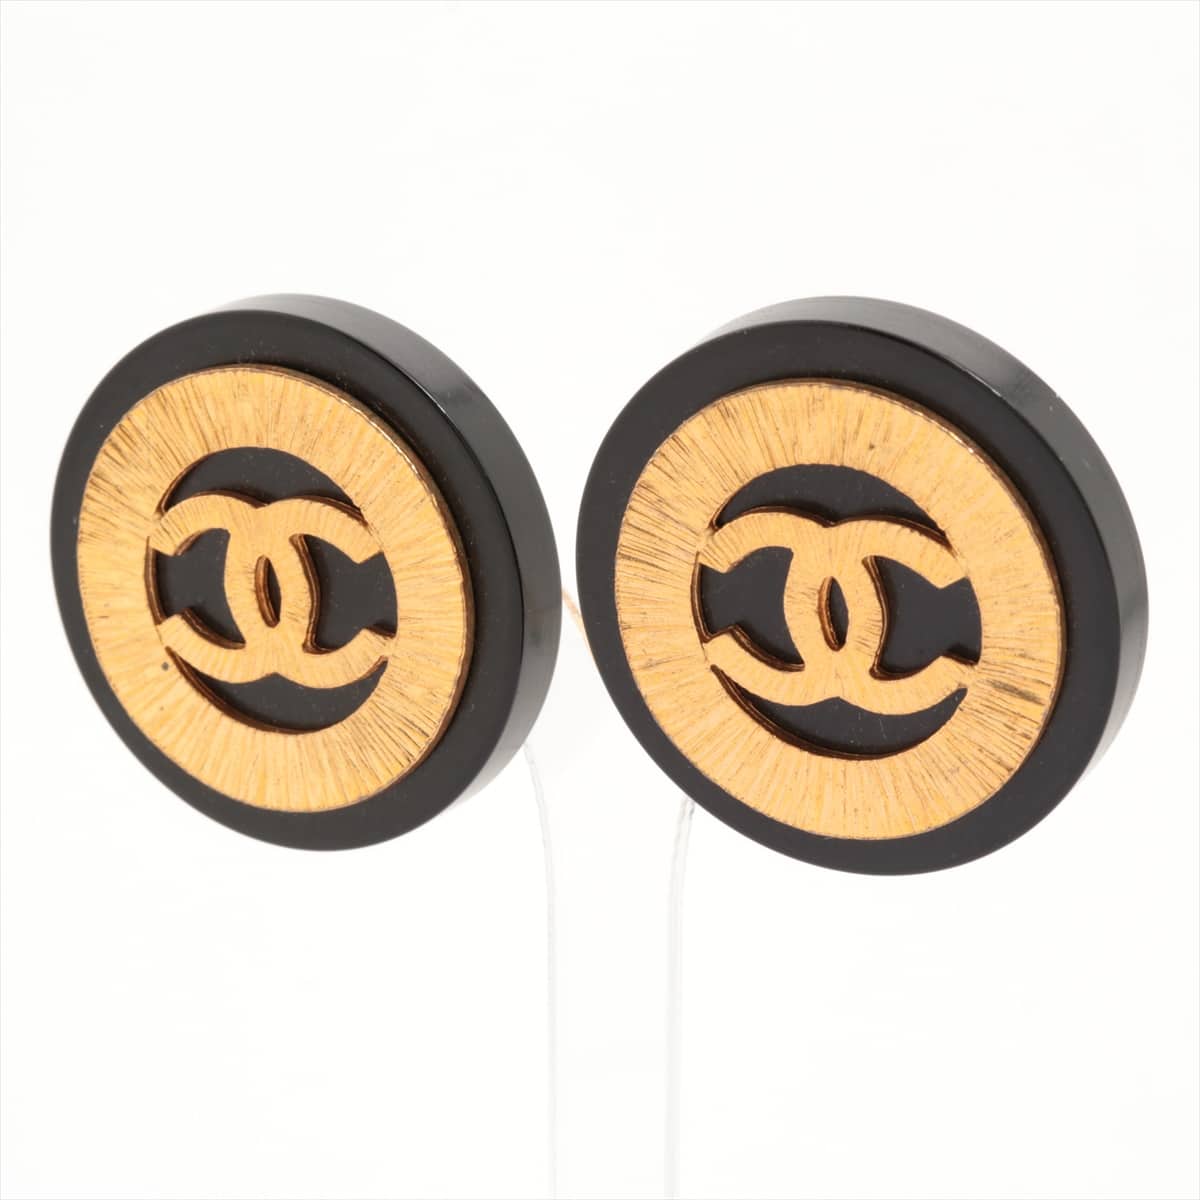 Chanel Coco Mark 2 6 Earrings (for both ears) GP x plastic Black×Gold